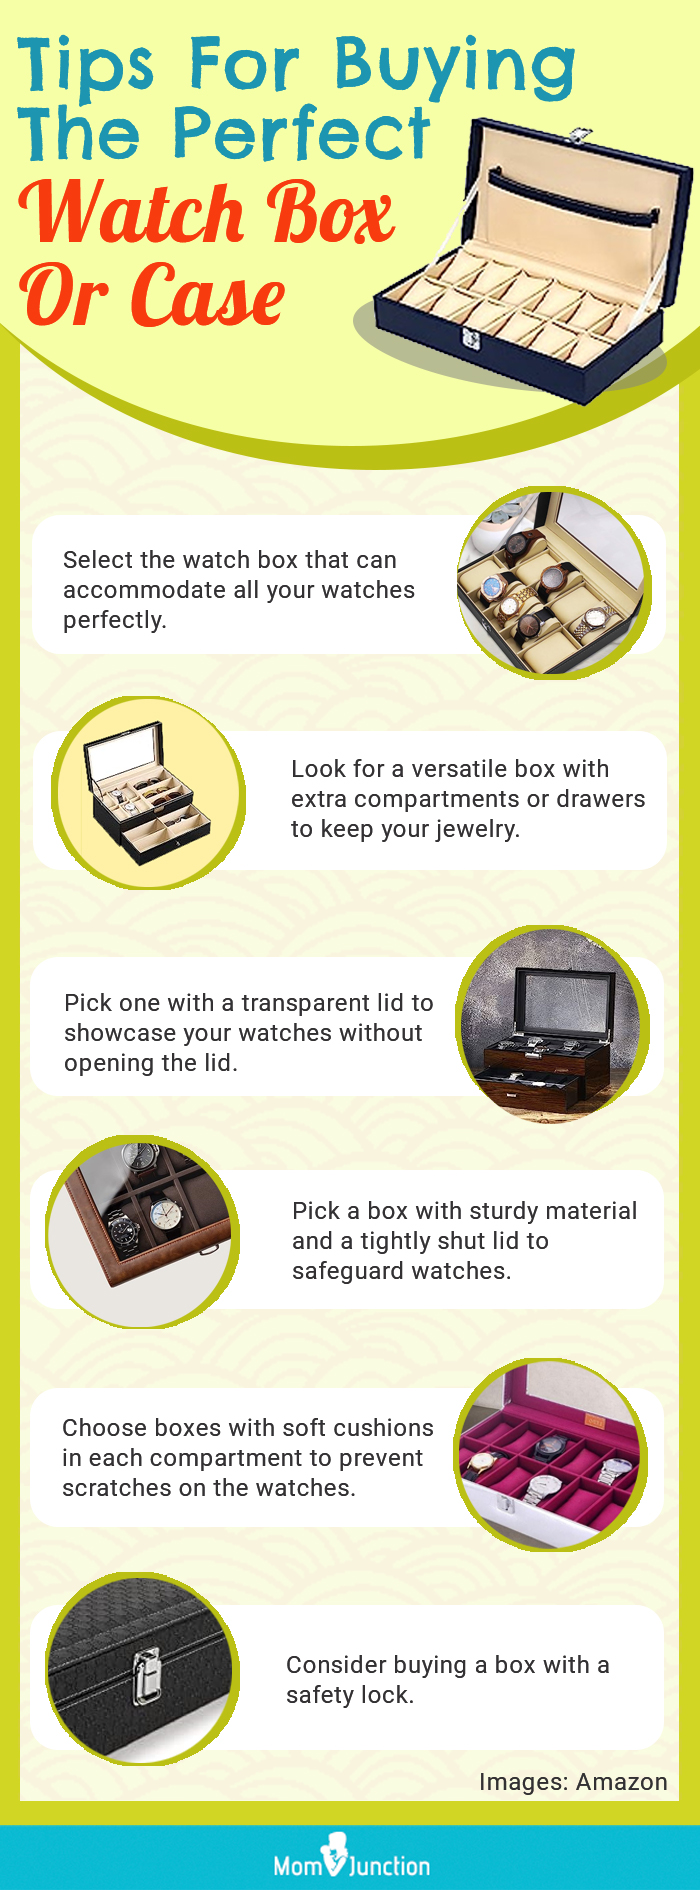 Tips For Buying The Perfect Watch Box Or Case (infographic)